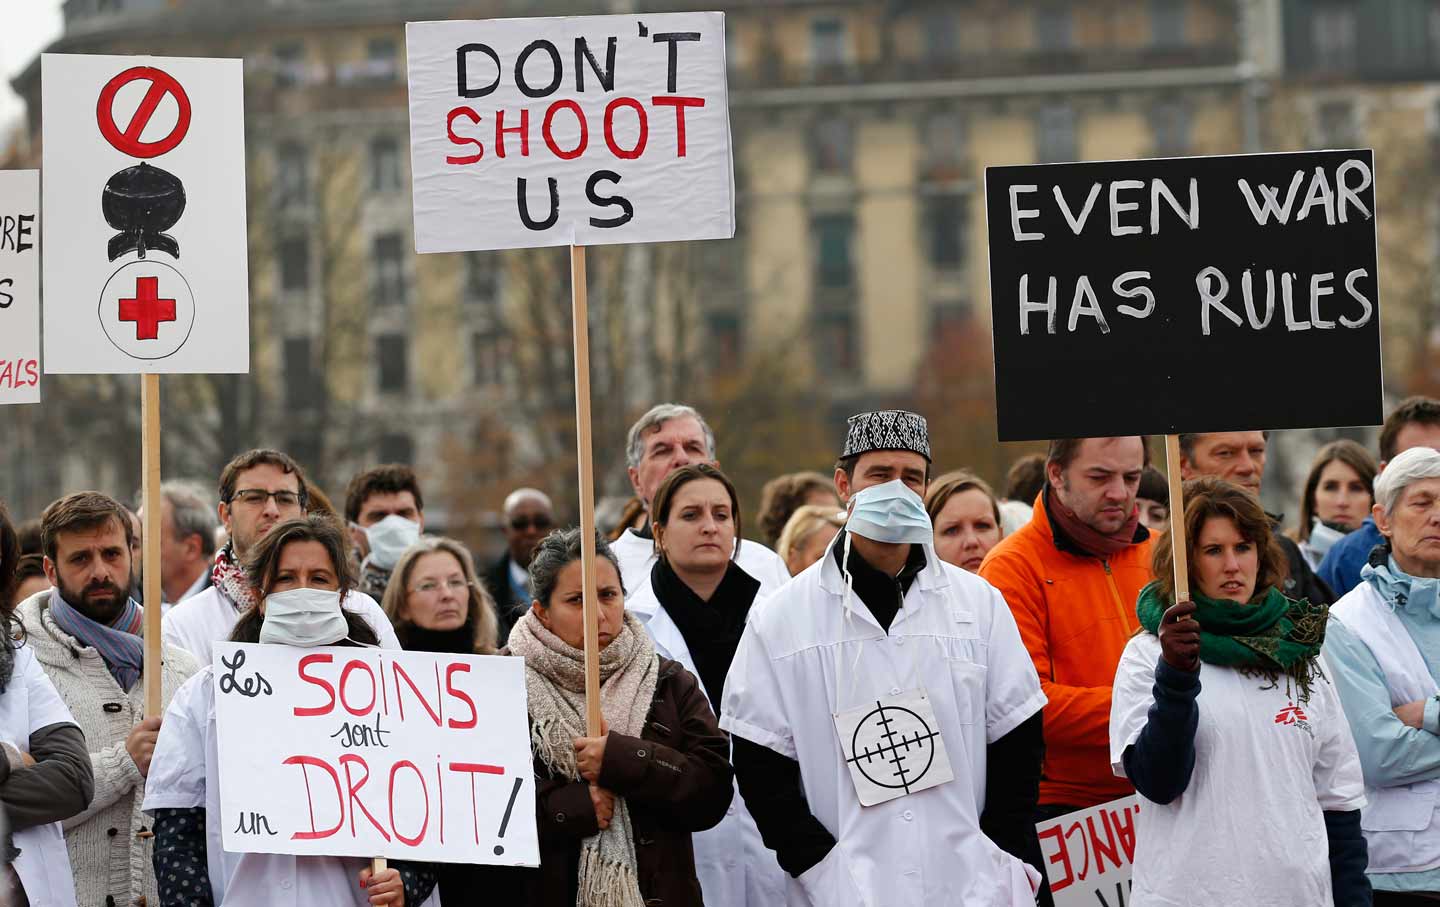 The staff of Medécins Sans Frontières (MSF), also known as Doctors Without Borders, demonstrates in Geneva, November 3, 2015.